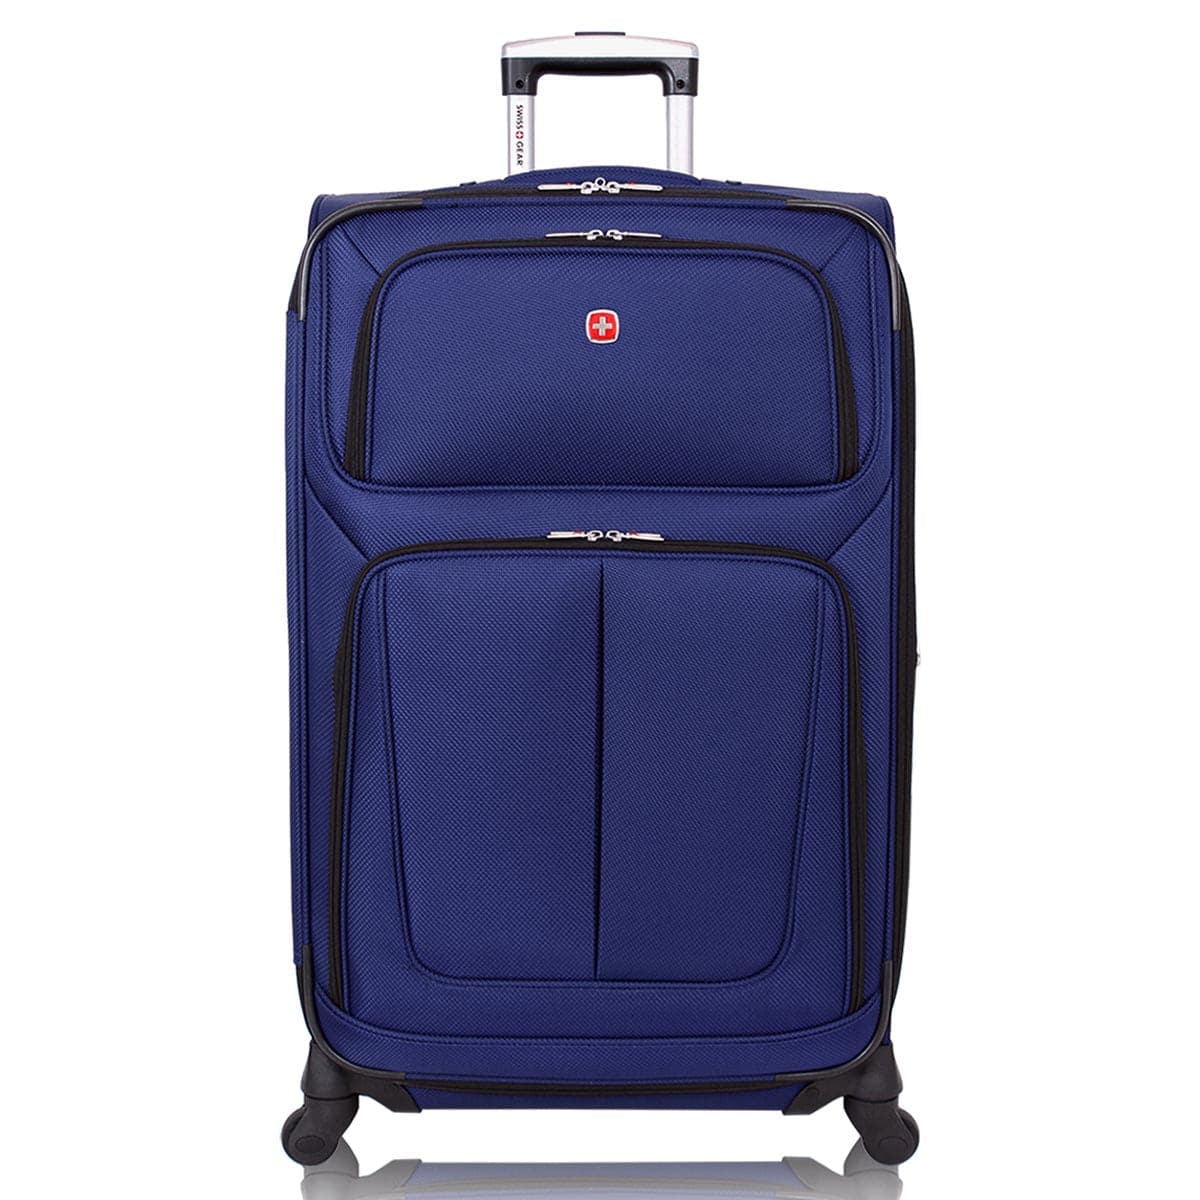 SwissGear 29" Check-In Spinner Luggage